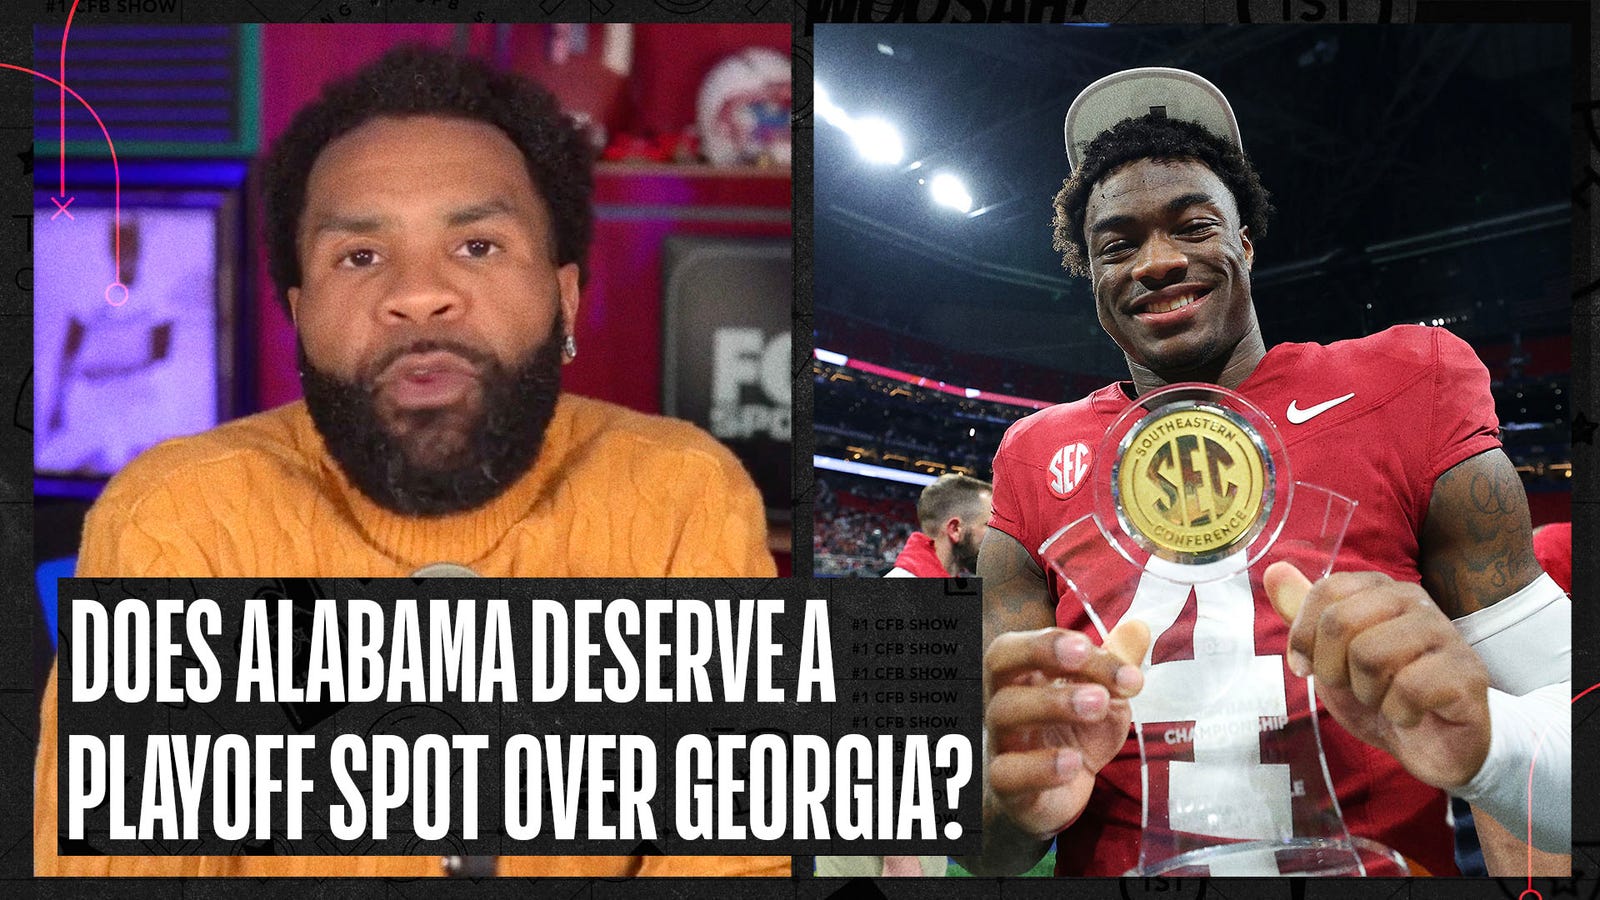 Does Alabama deserve a spot in the playoff after its victory over Georgia?